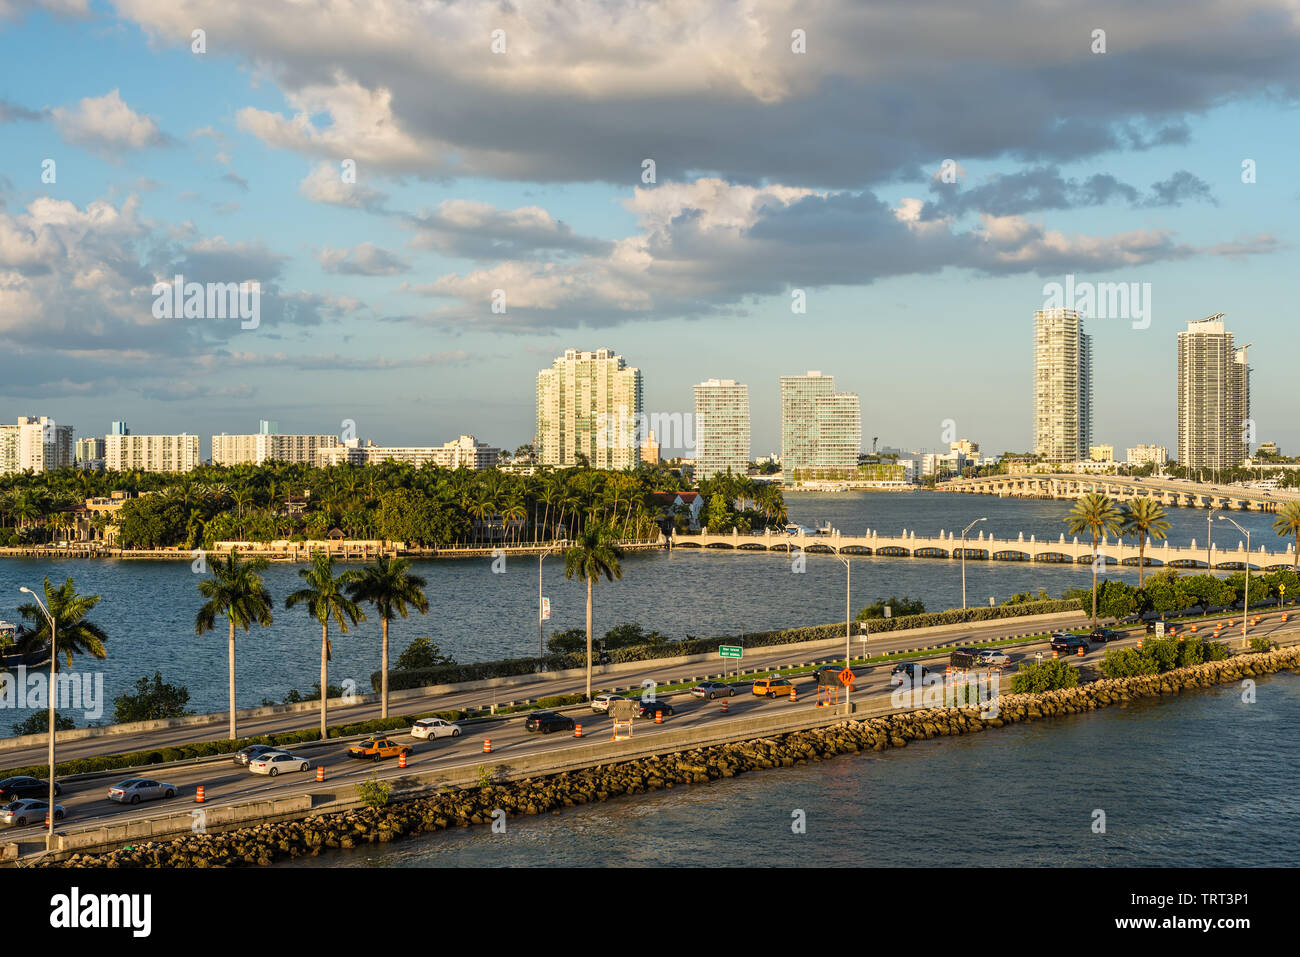 Miami, FL, United States - April 20, 2019:  View of MacArthur Causeway and Star Island at Biscayne Bay in Miami, Florida, United States of America. Stock Photo